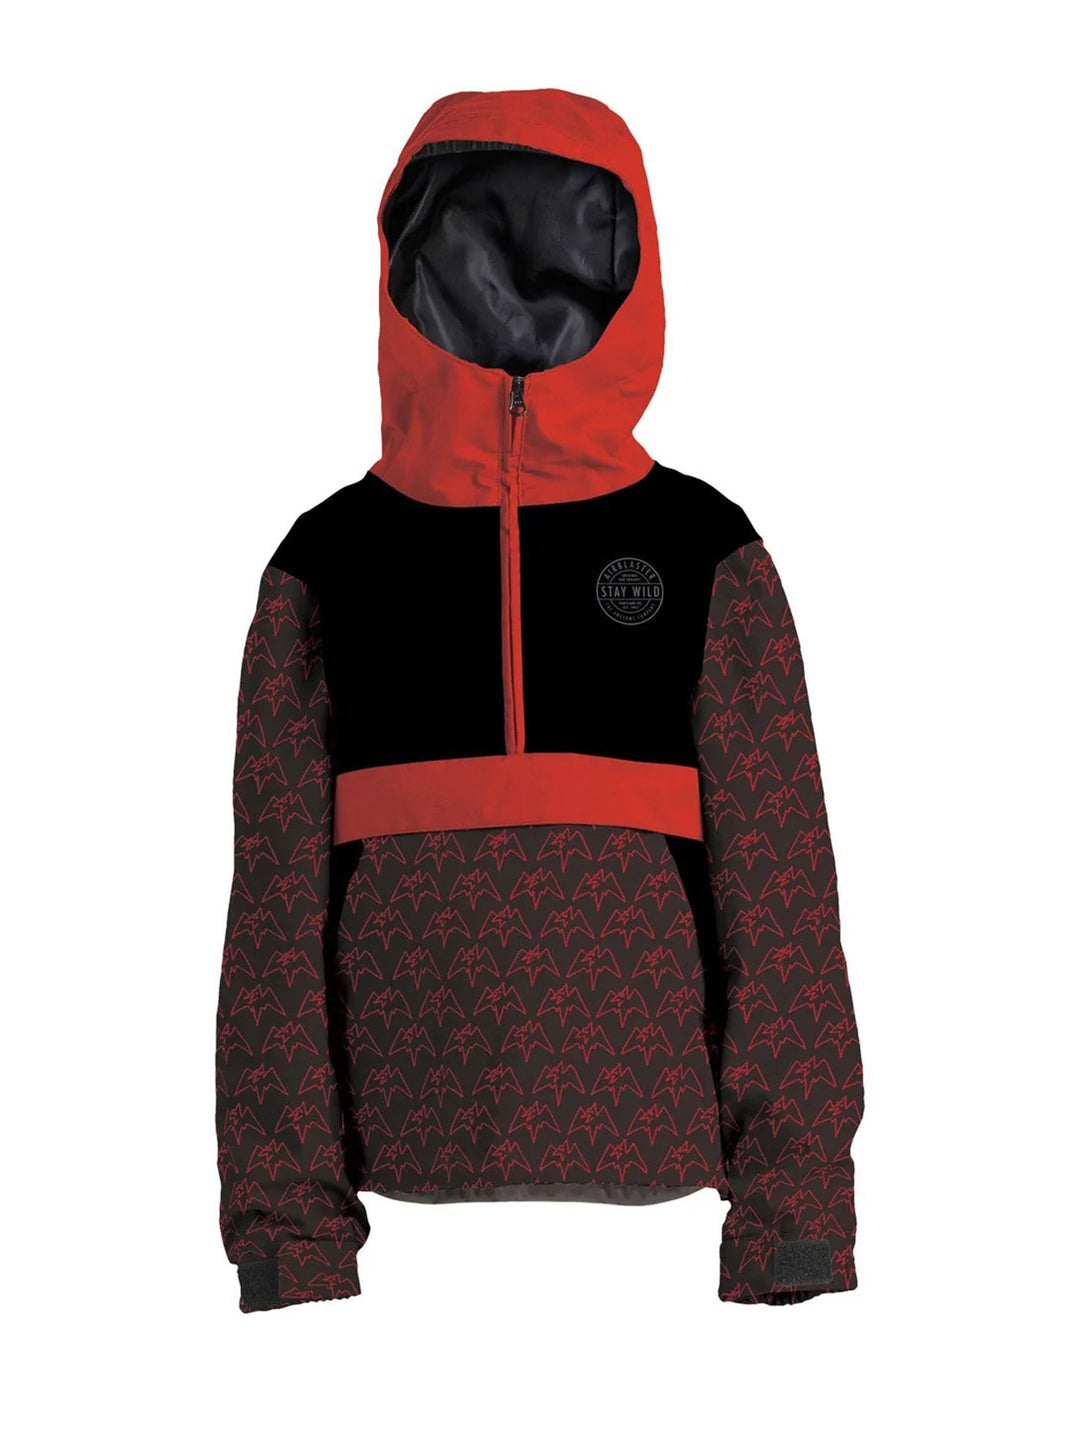 AIRBLASTER YOUTH TRENCHOVER JACKET CRIMSON TERRY